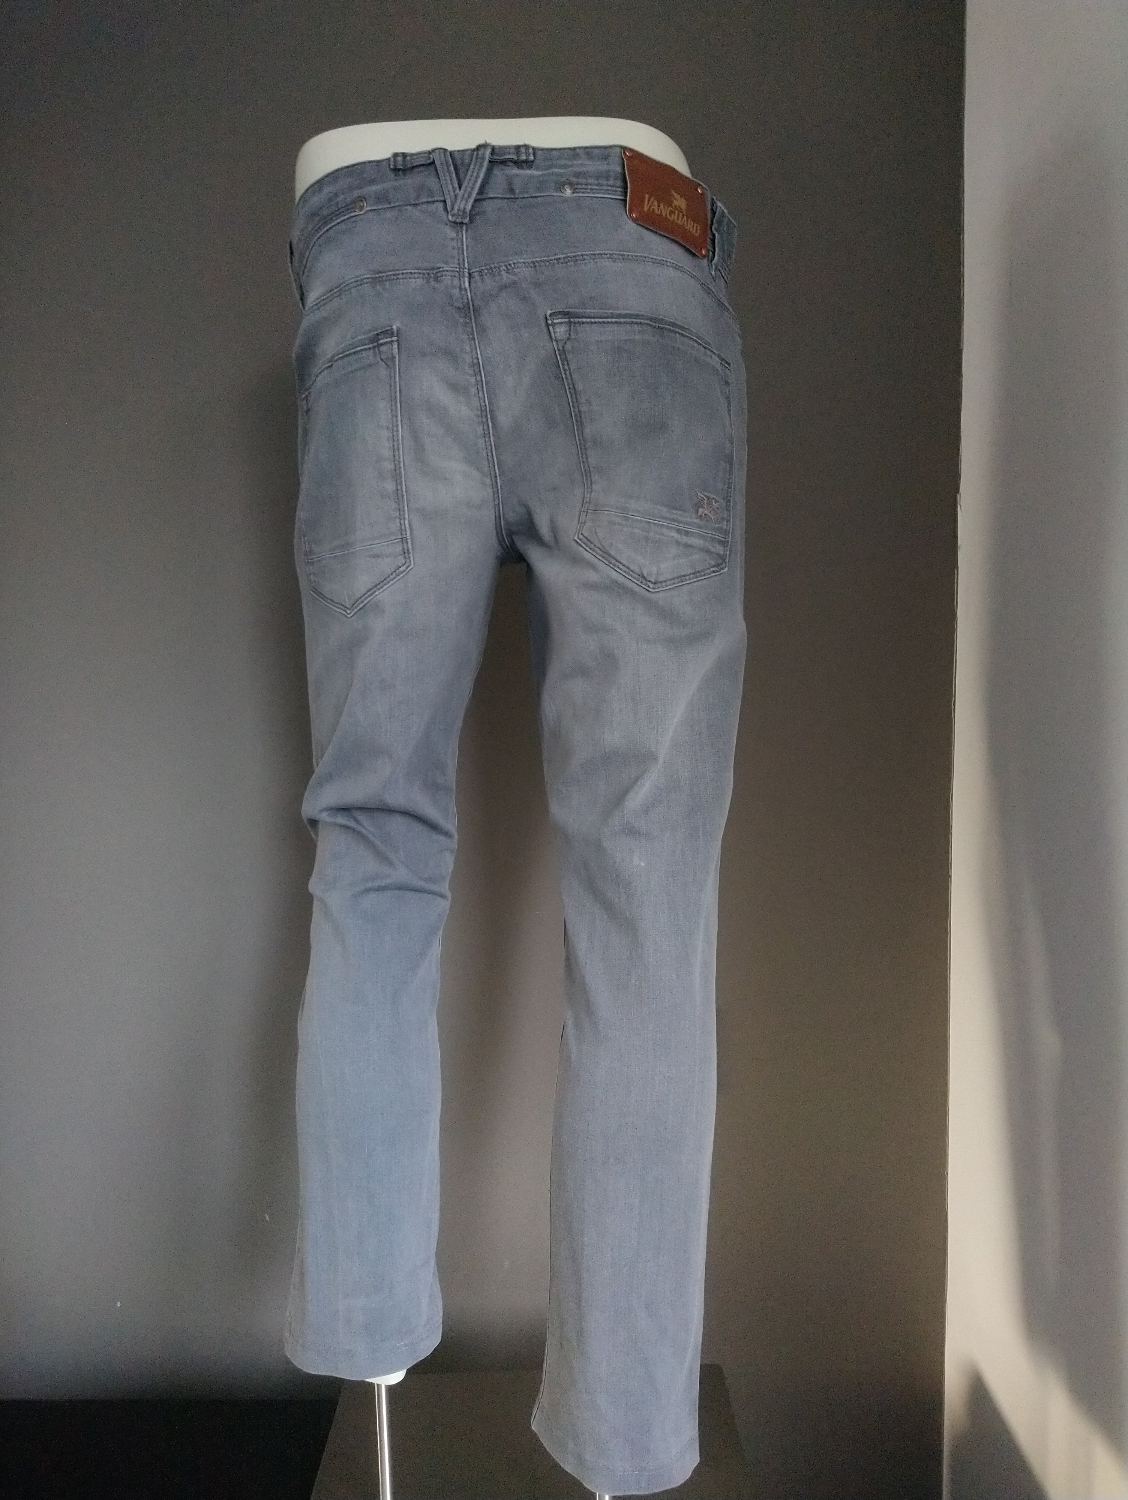 Vanguard jeans. Gray colored. Size W33 - L26. (shortened)